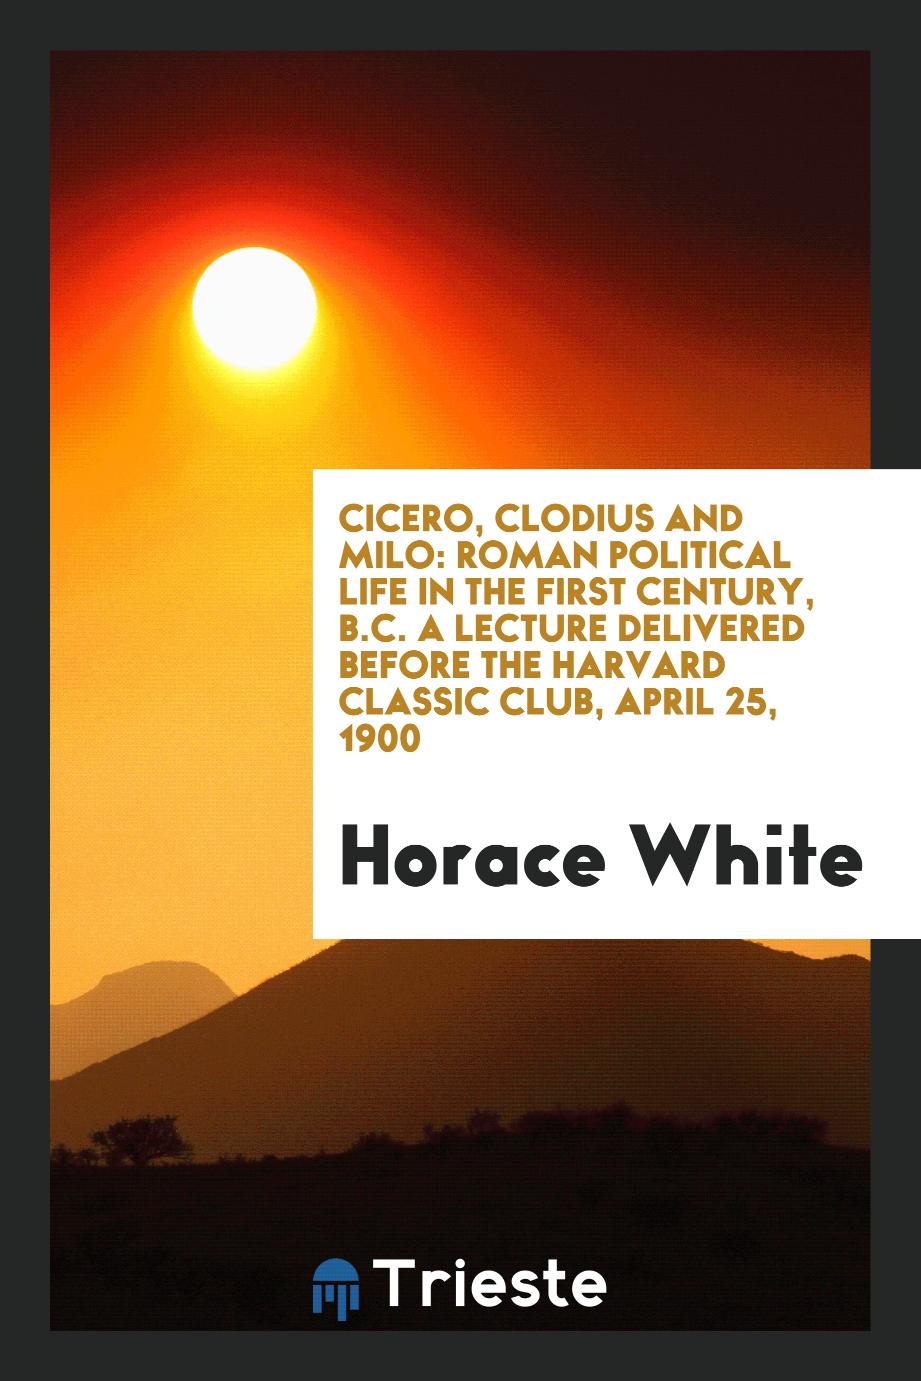 Cicero, Clodius and Milo: Roman Political Life in the First Century, B.C. A Lecture Delivered before the Harvard classic club, April 25, 1900